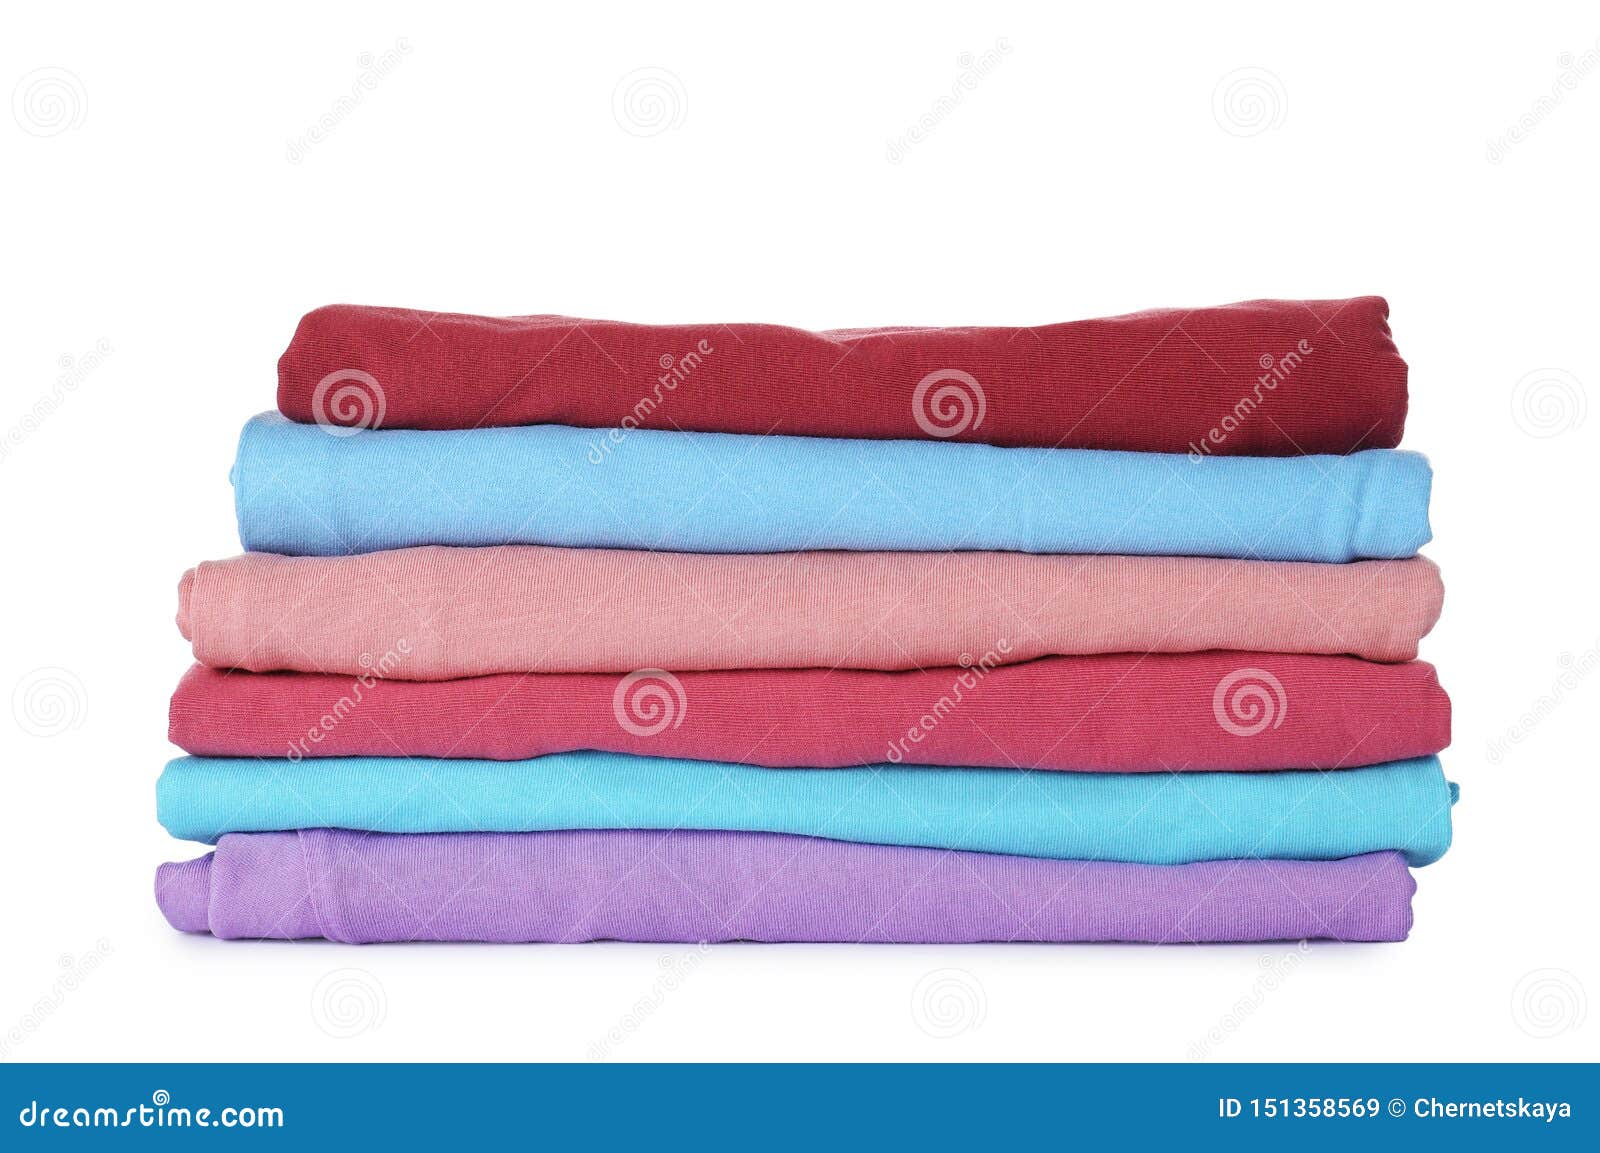 Stack of folded clothes stock image. Image of folded - 151358569